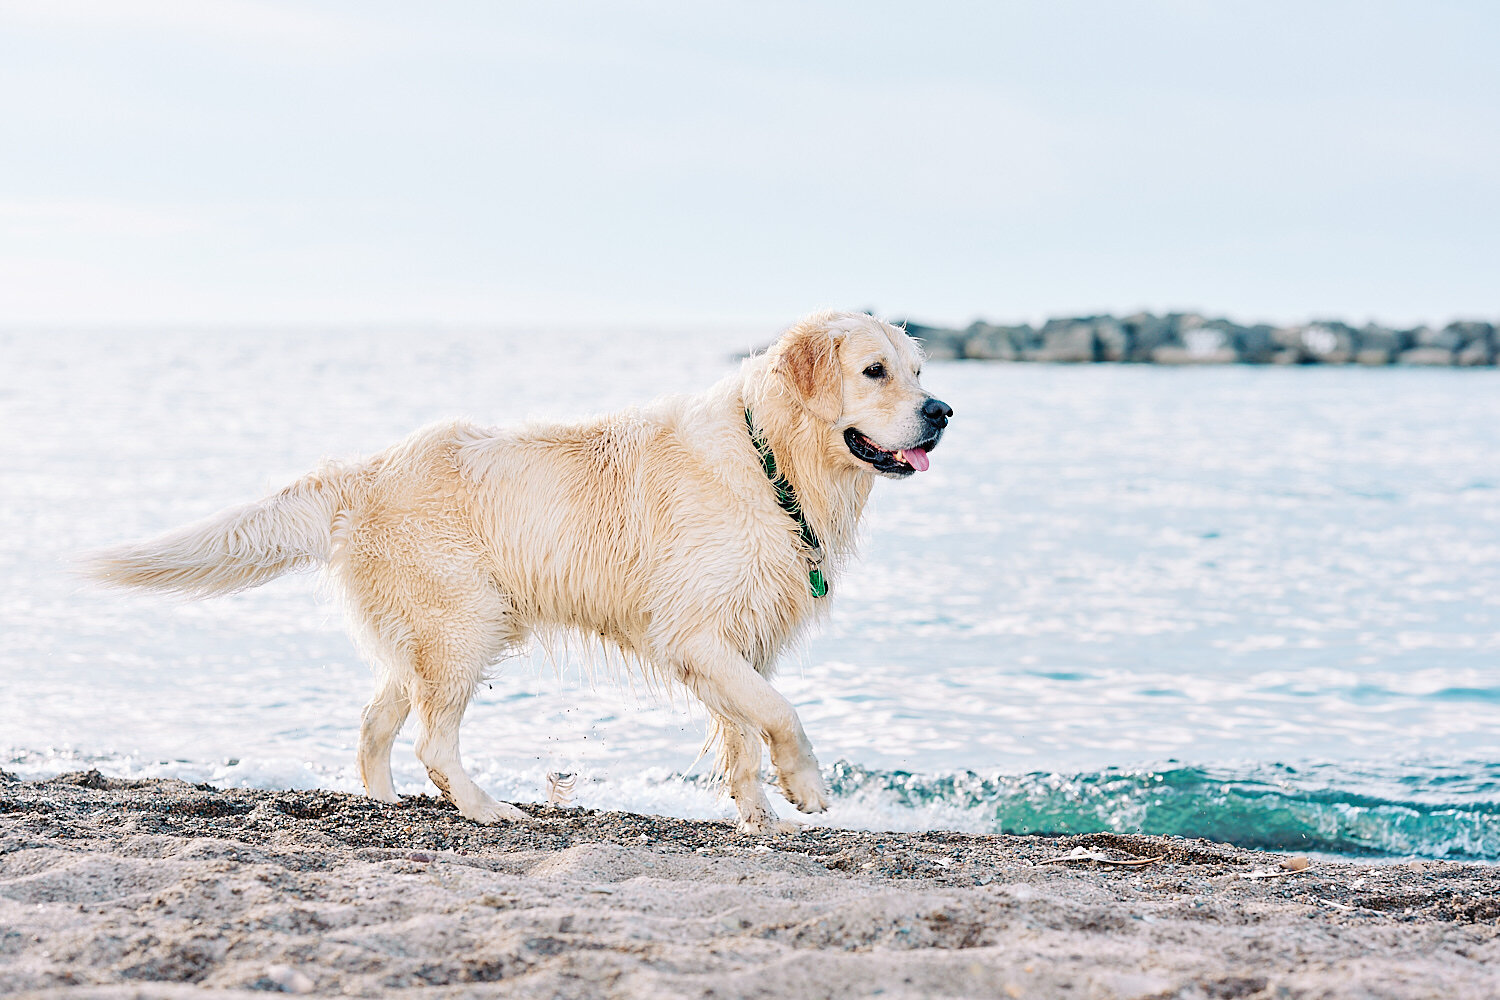  Joyka the Golden Retriever is enjoying the beach time at Presque Isle State park on Lake Erie in Western Pennsylvania on a warm summer afternoon. His fur is wet and the water is shining  in the sun. 